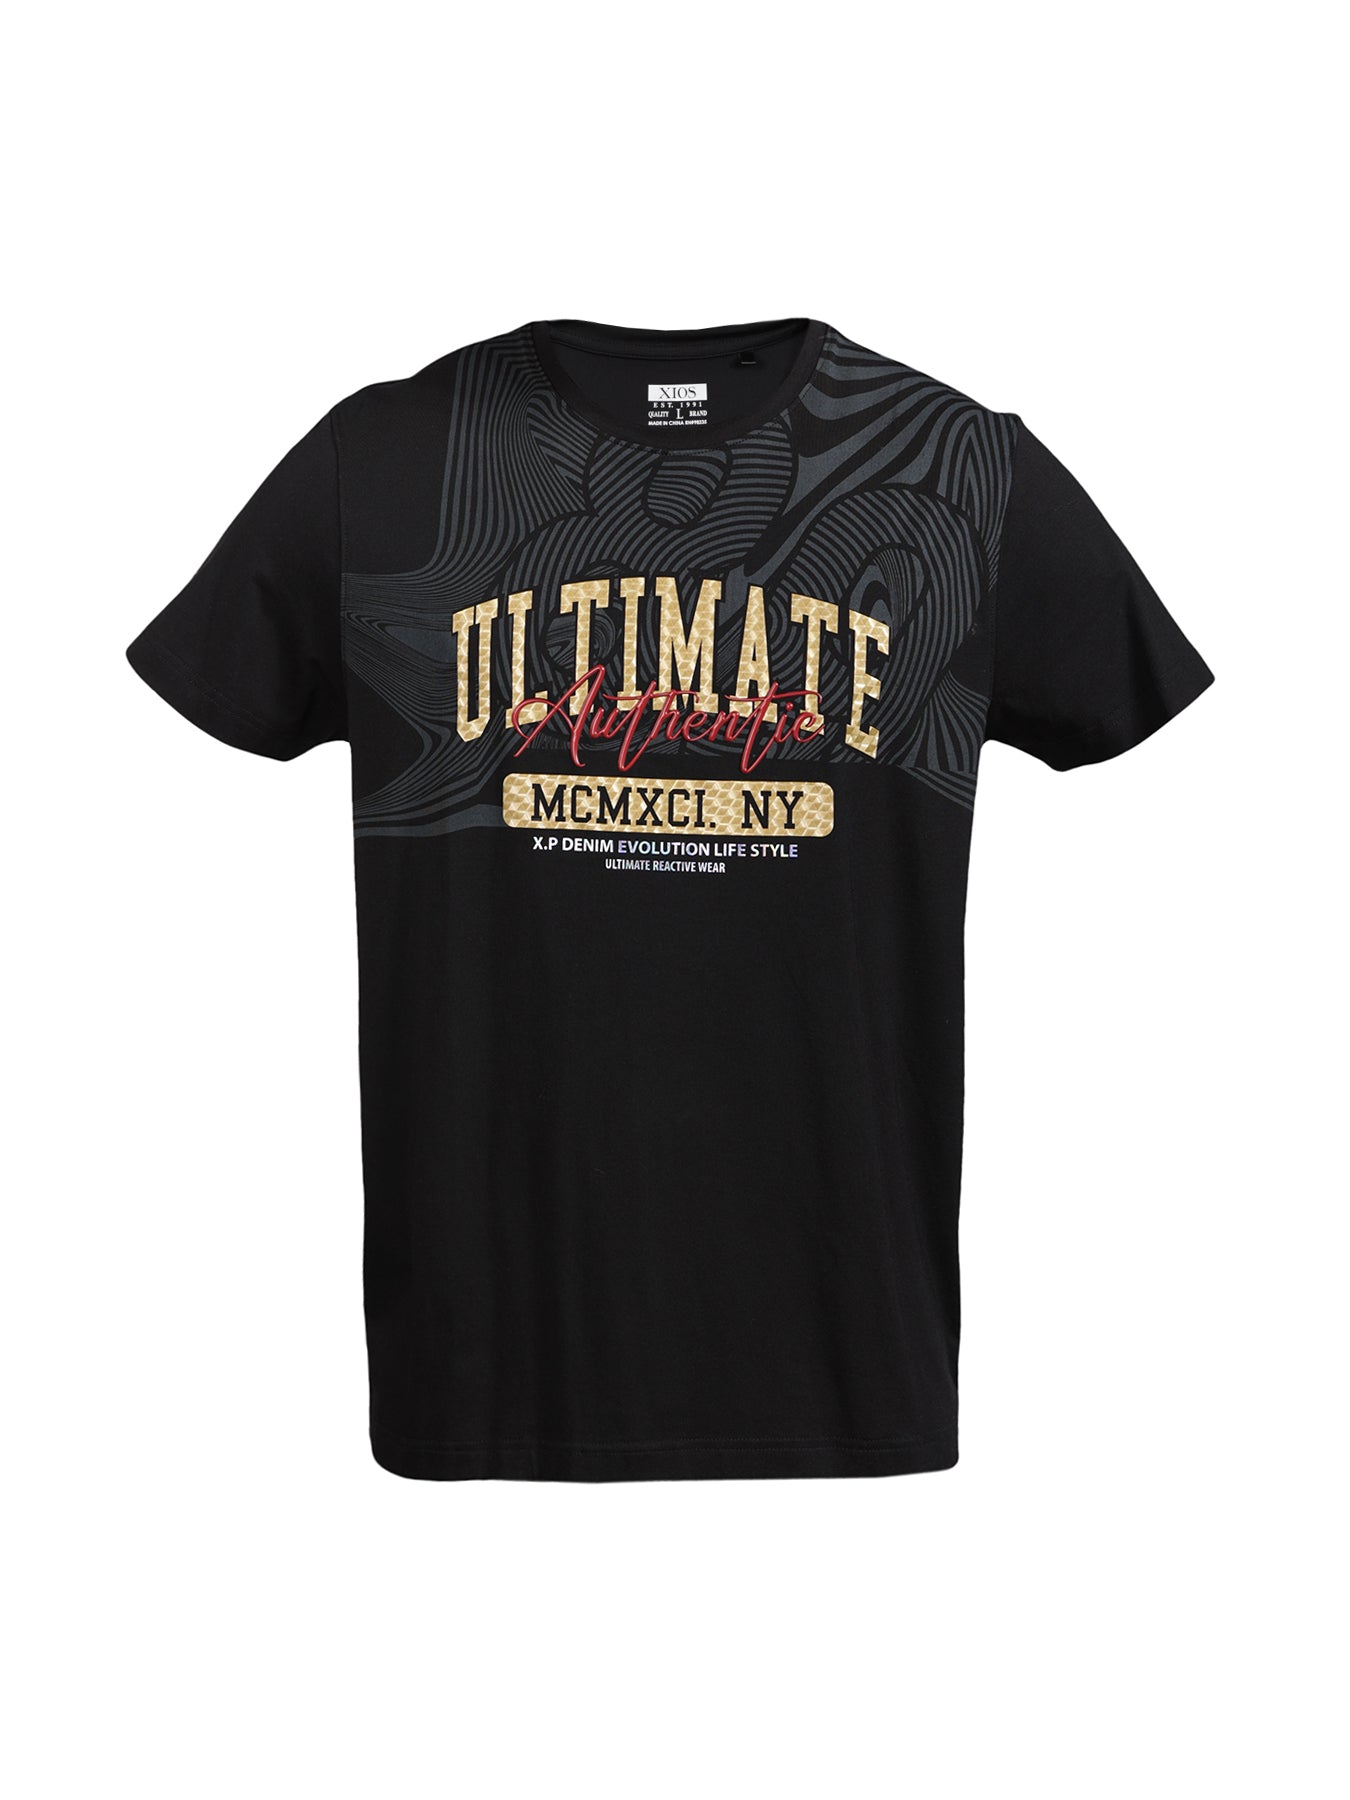 "Ultimate Authentic" Graphic Tee